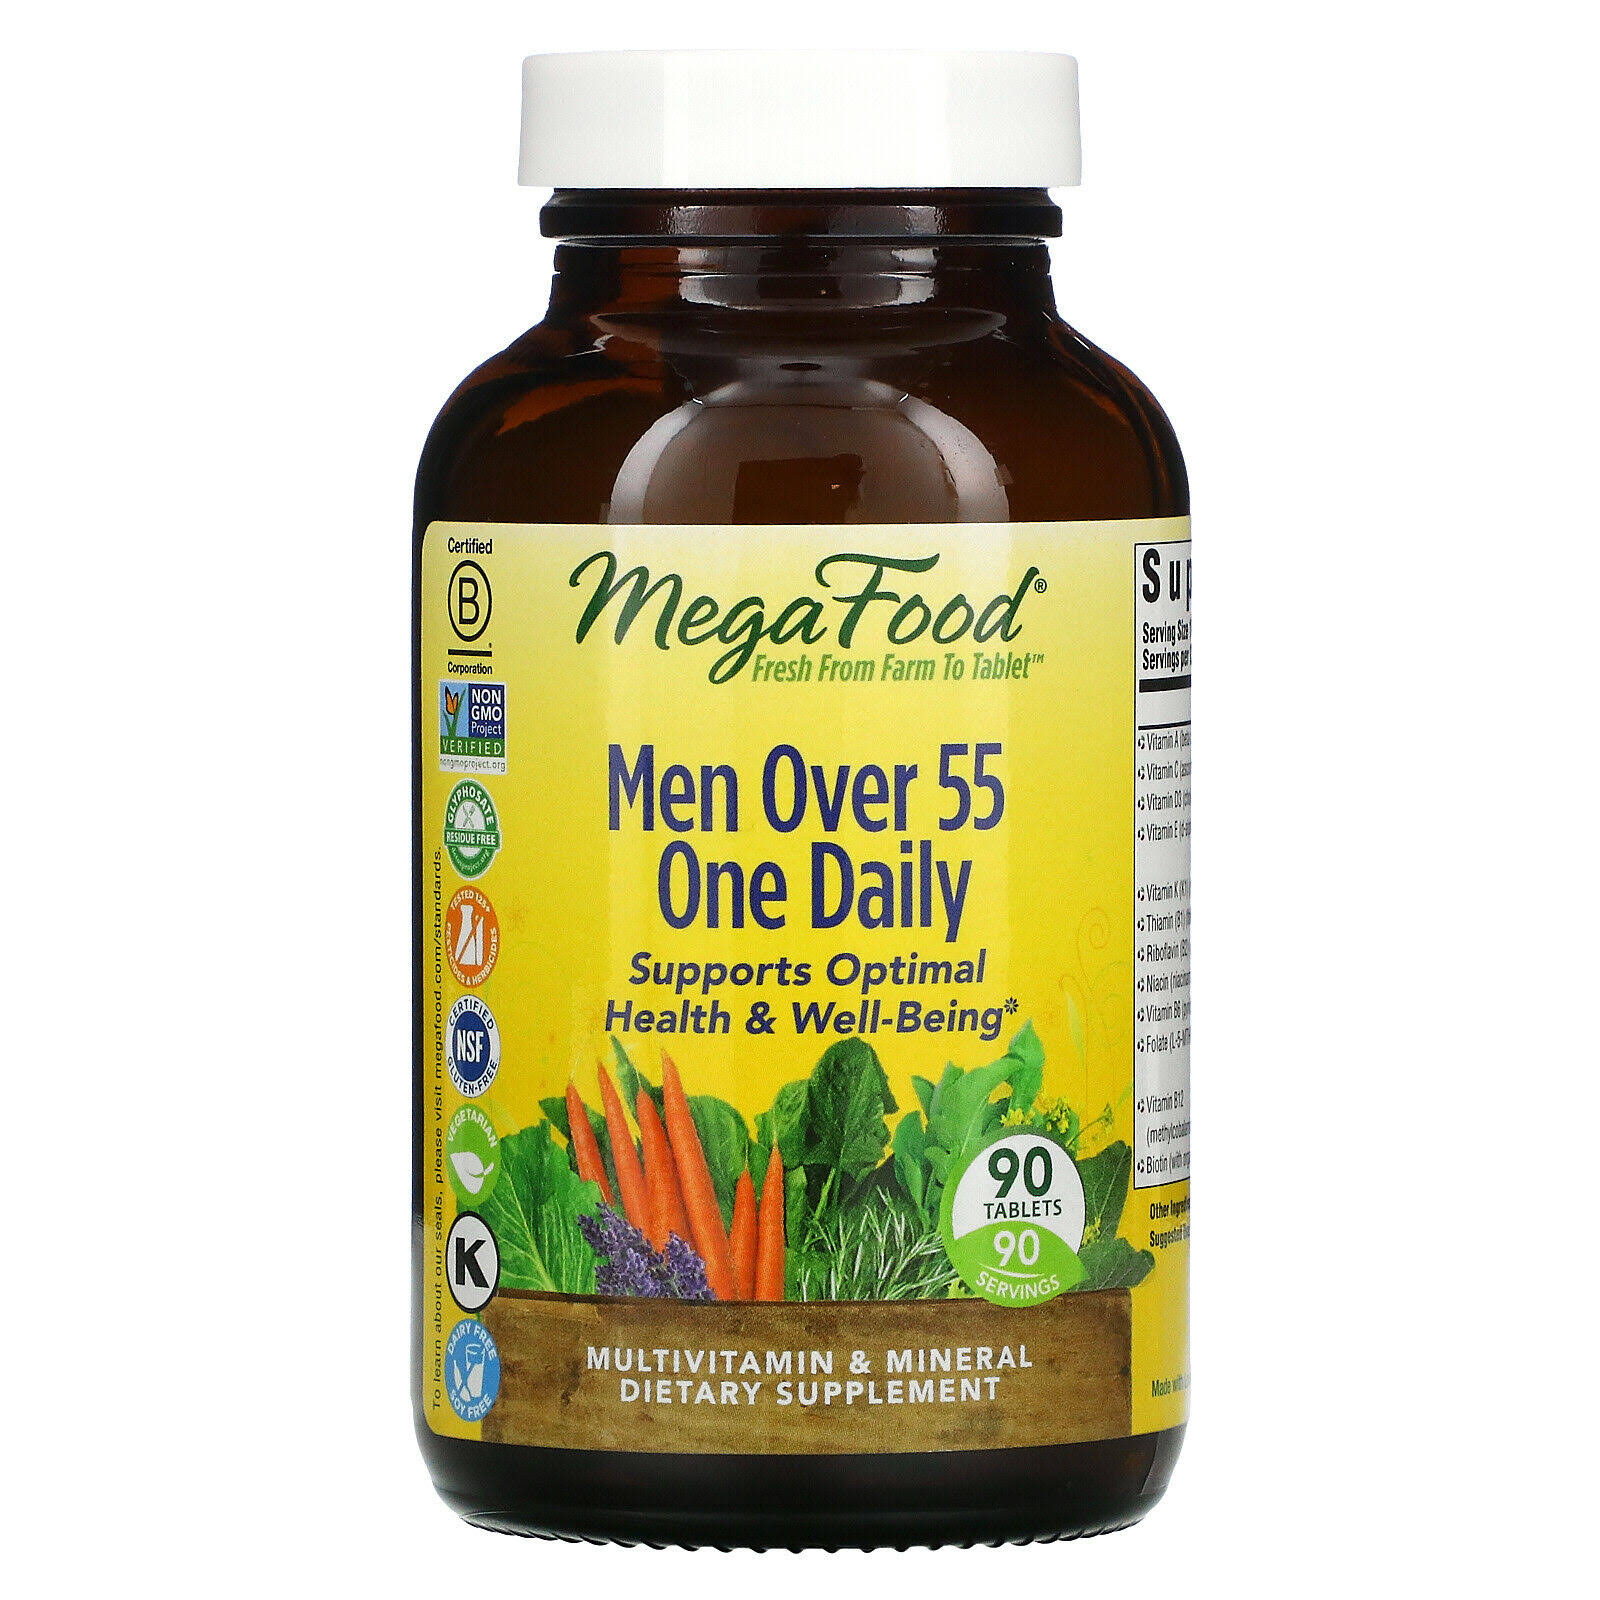 MegaFood - Men Over 55 One Daily - 90 Tablets